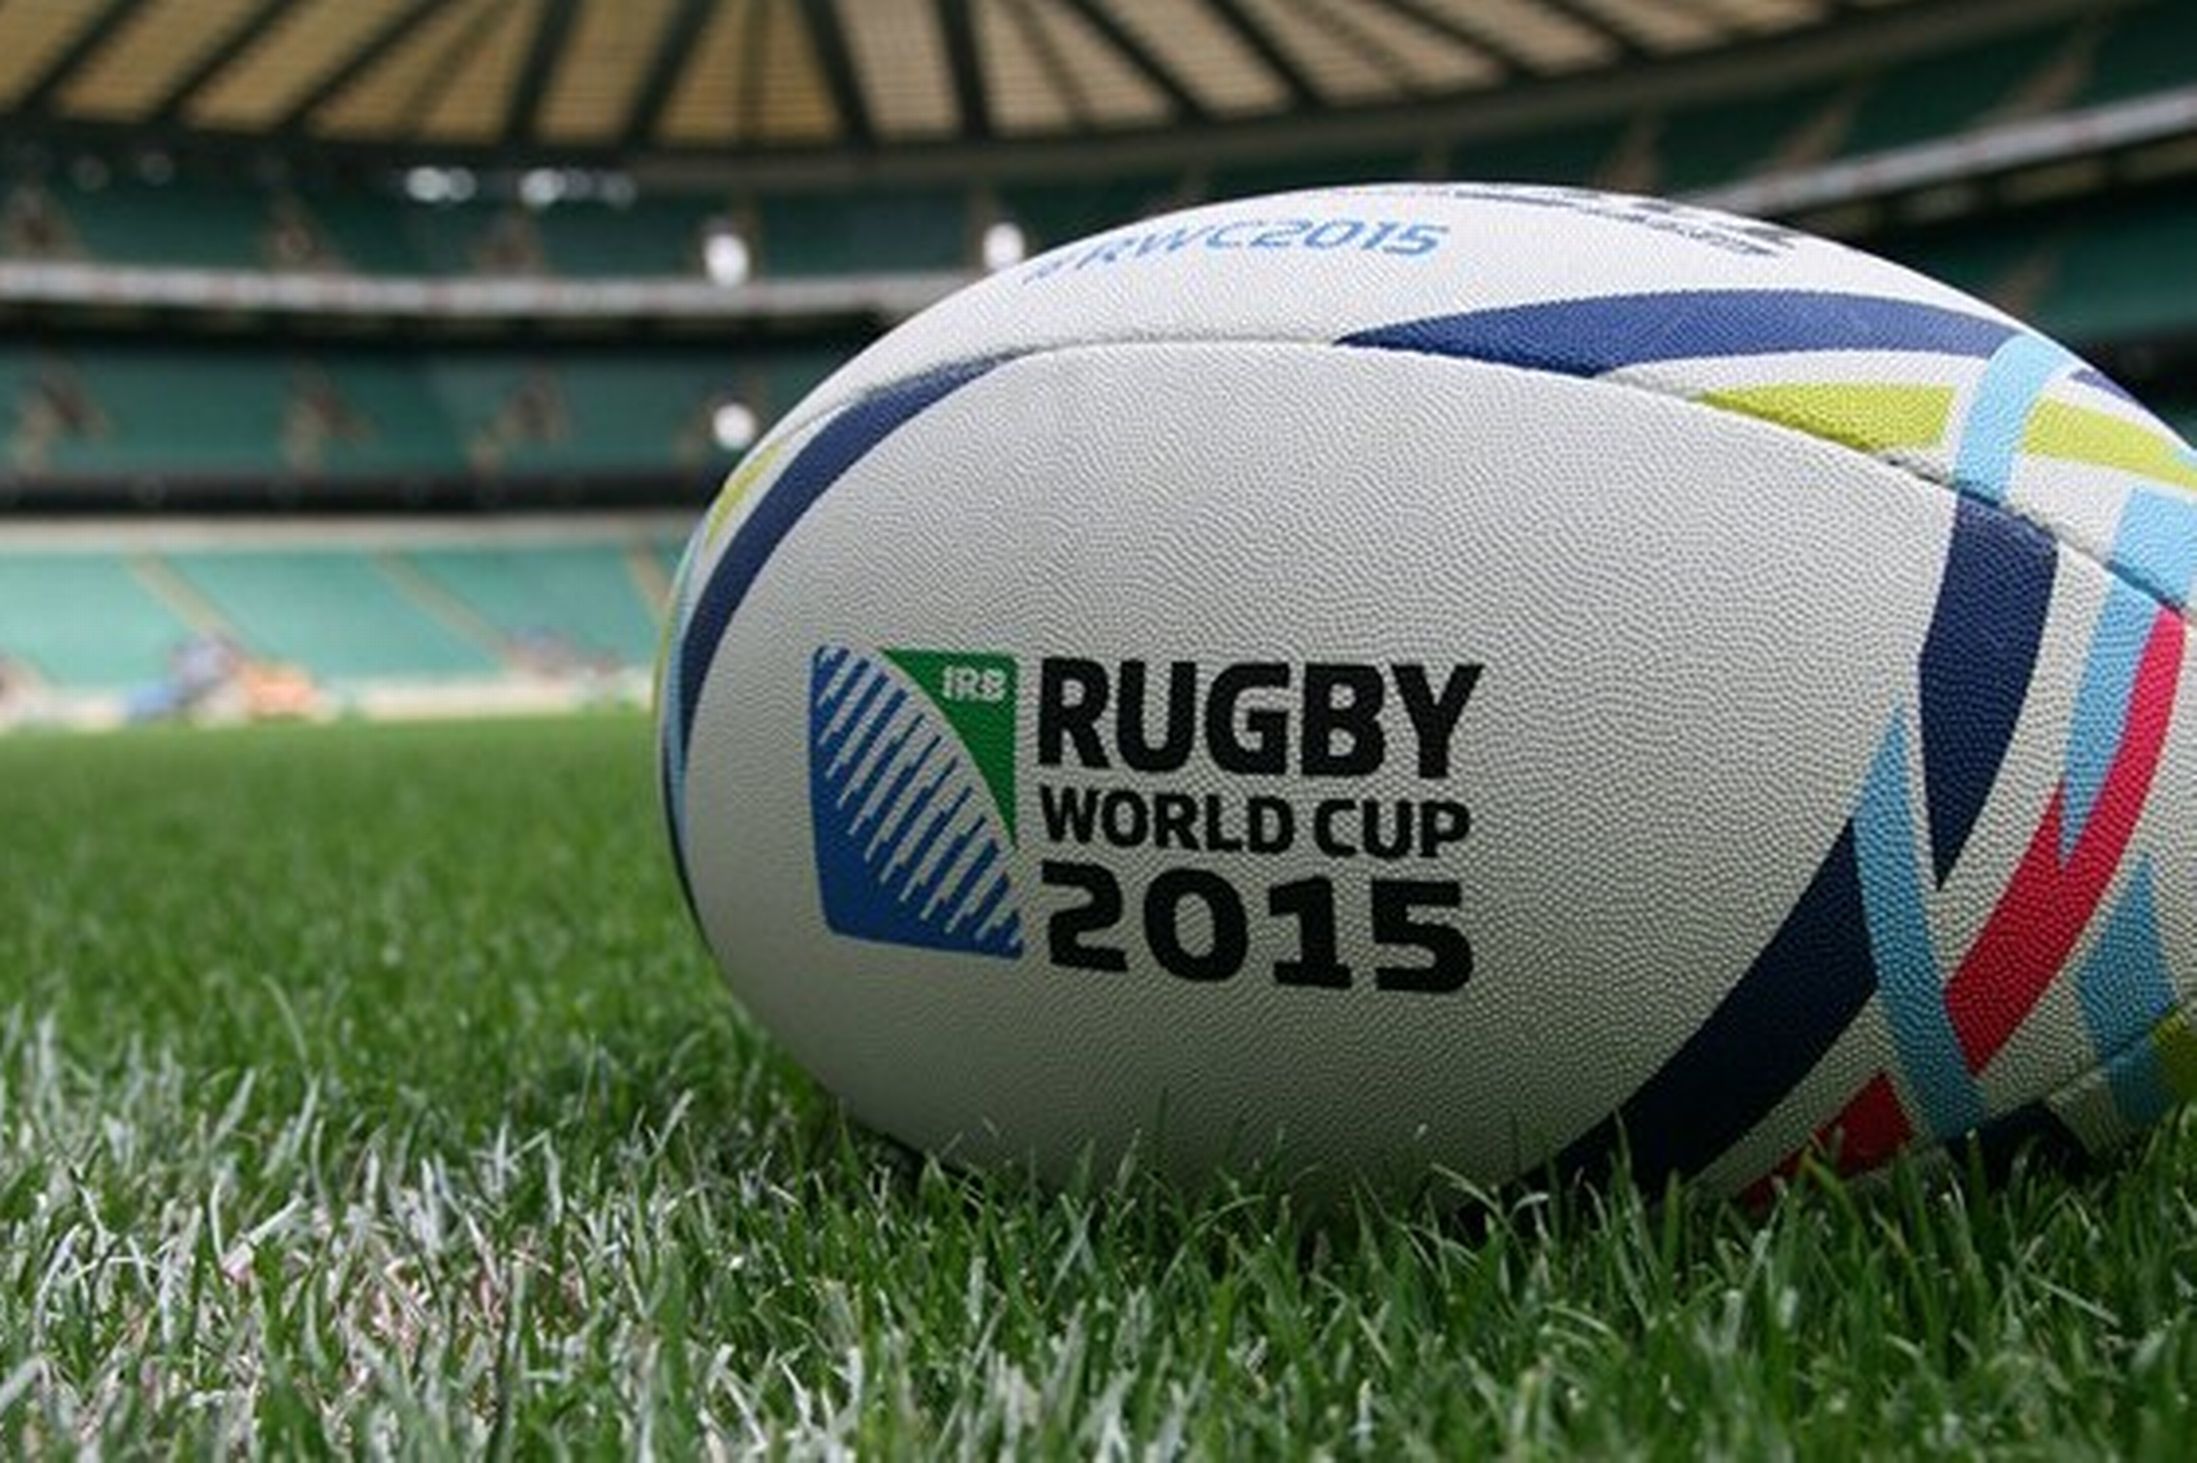 Are you ready for the Rugby World Cup kick off?